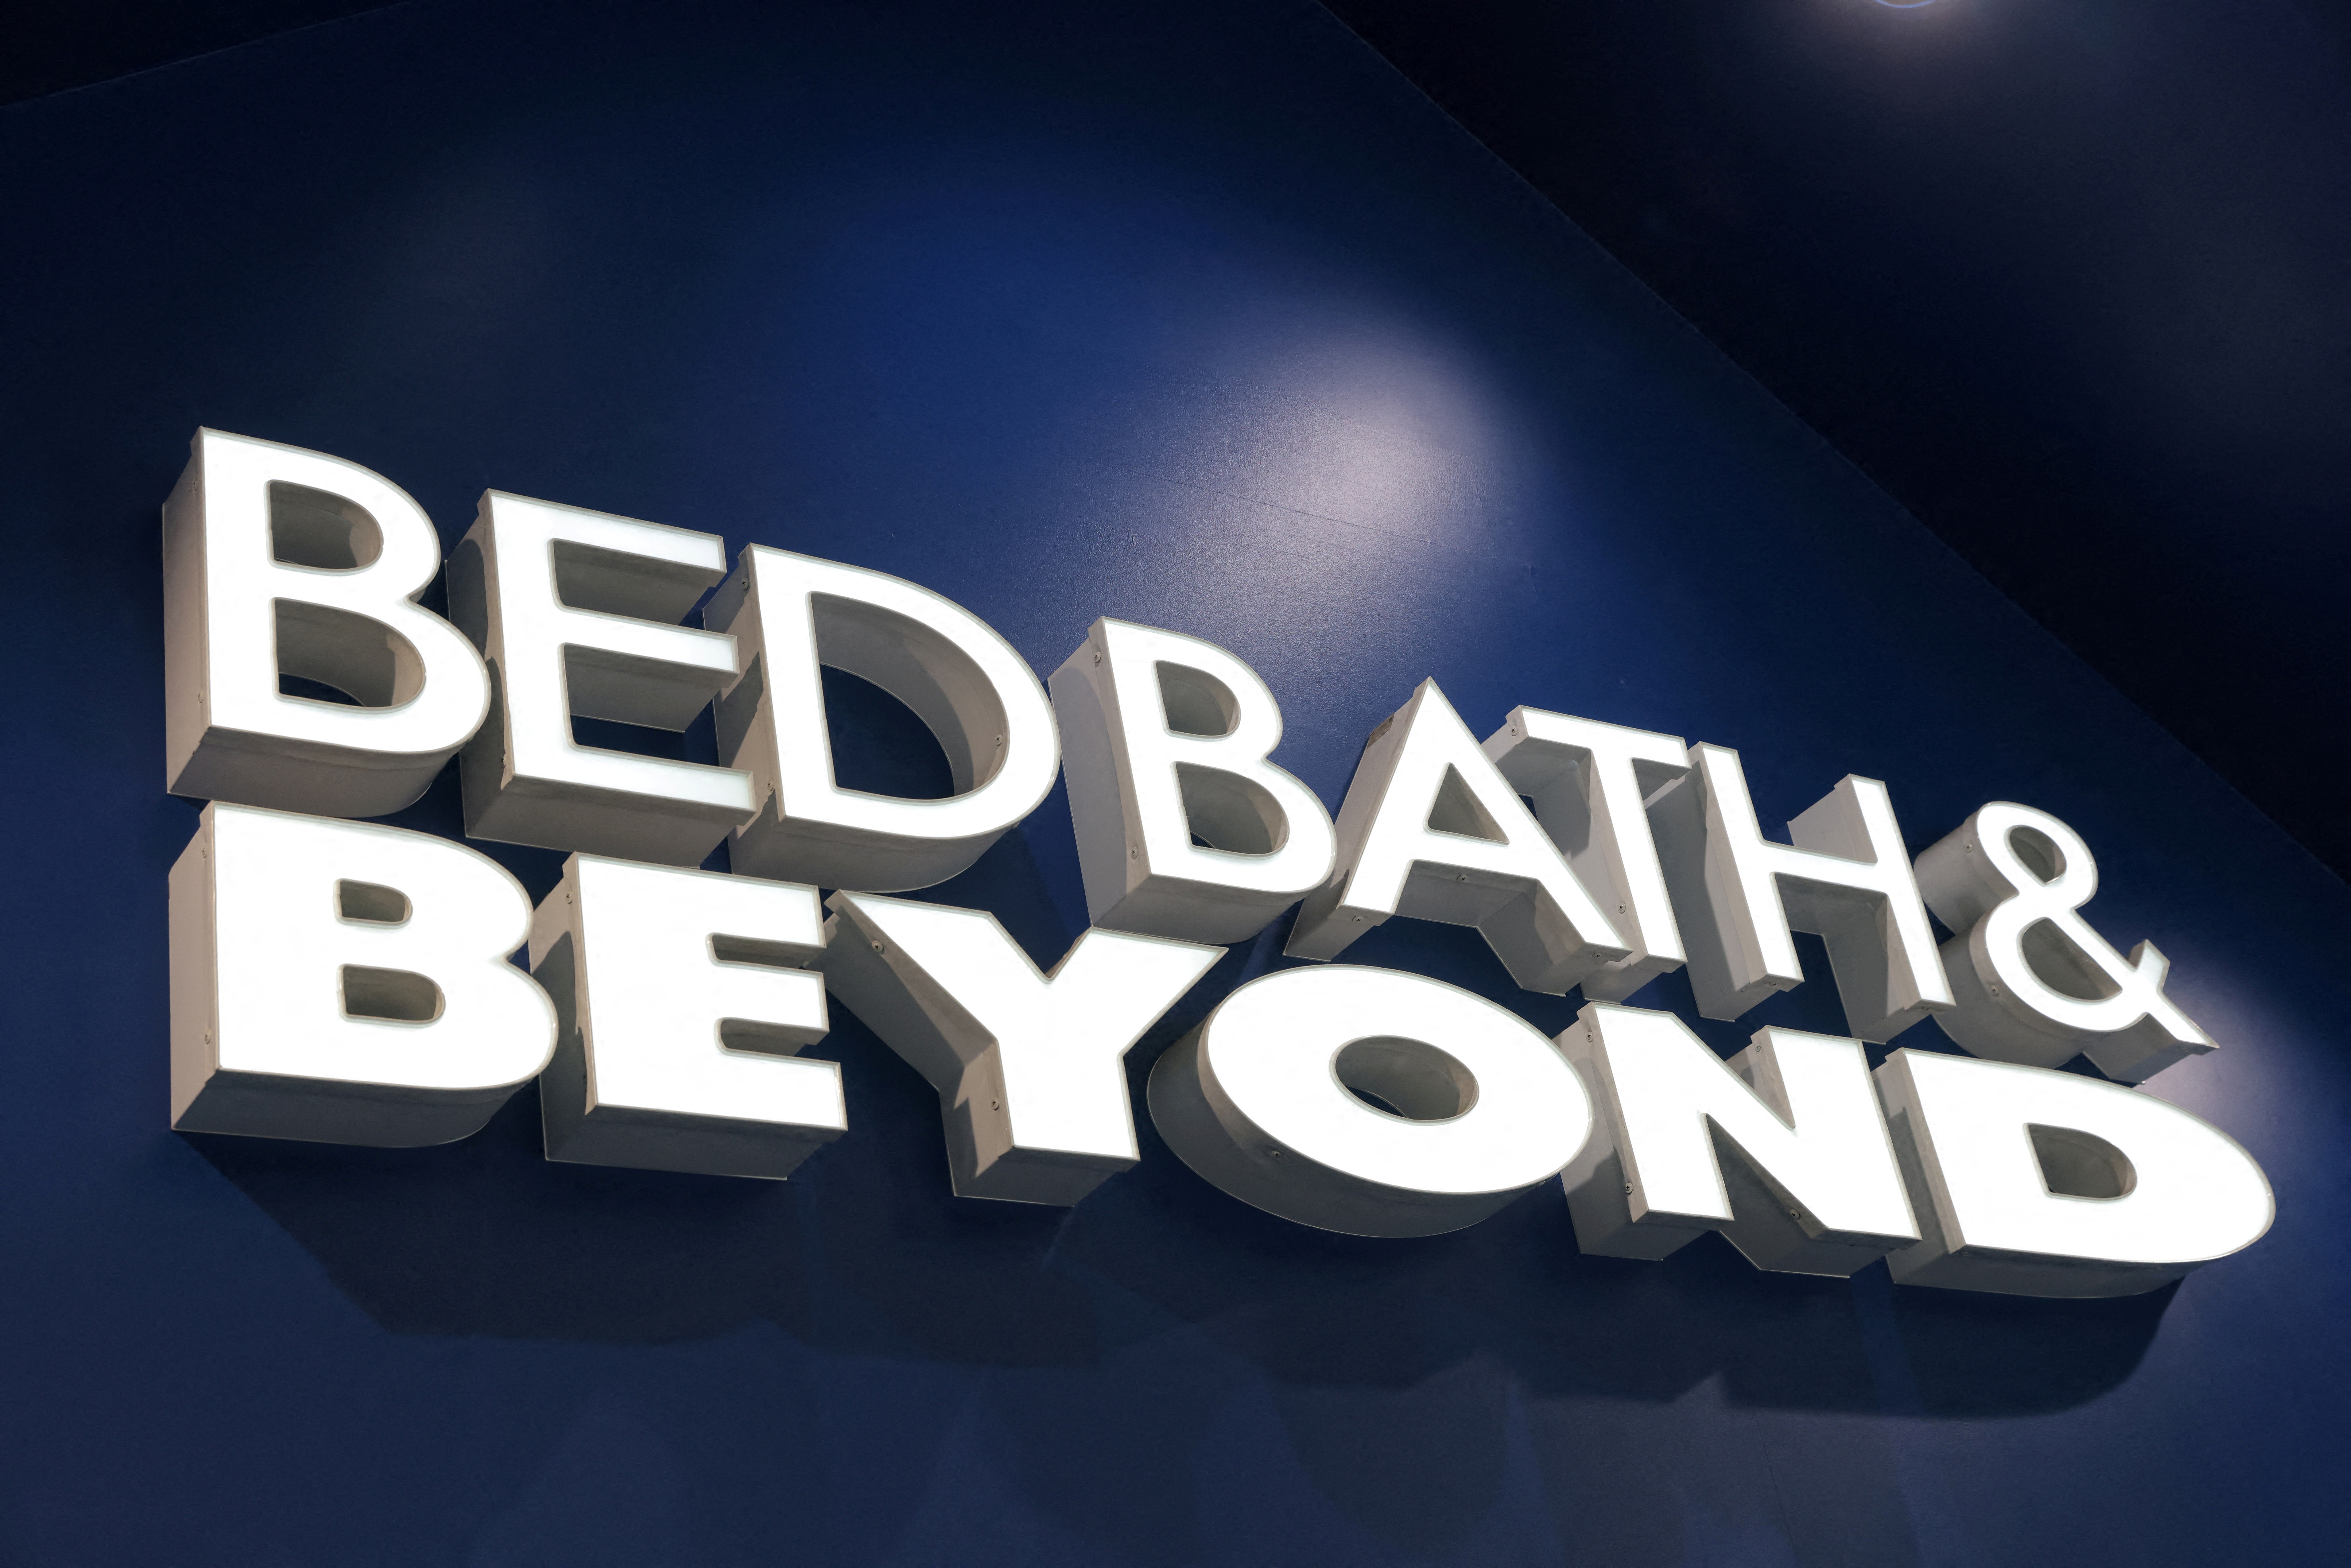 The signs are seen at the Bed Bath & Beyond store in Manhattan, New York City